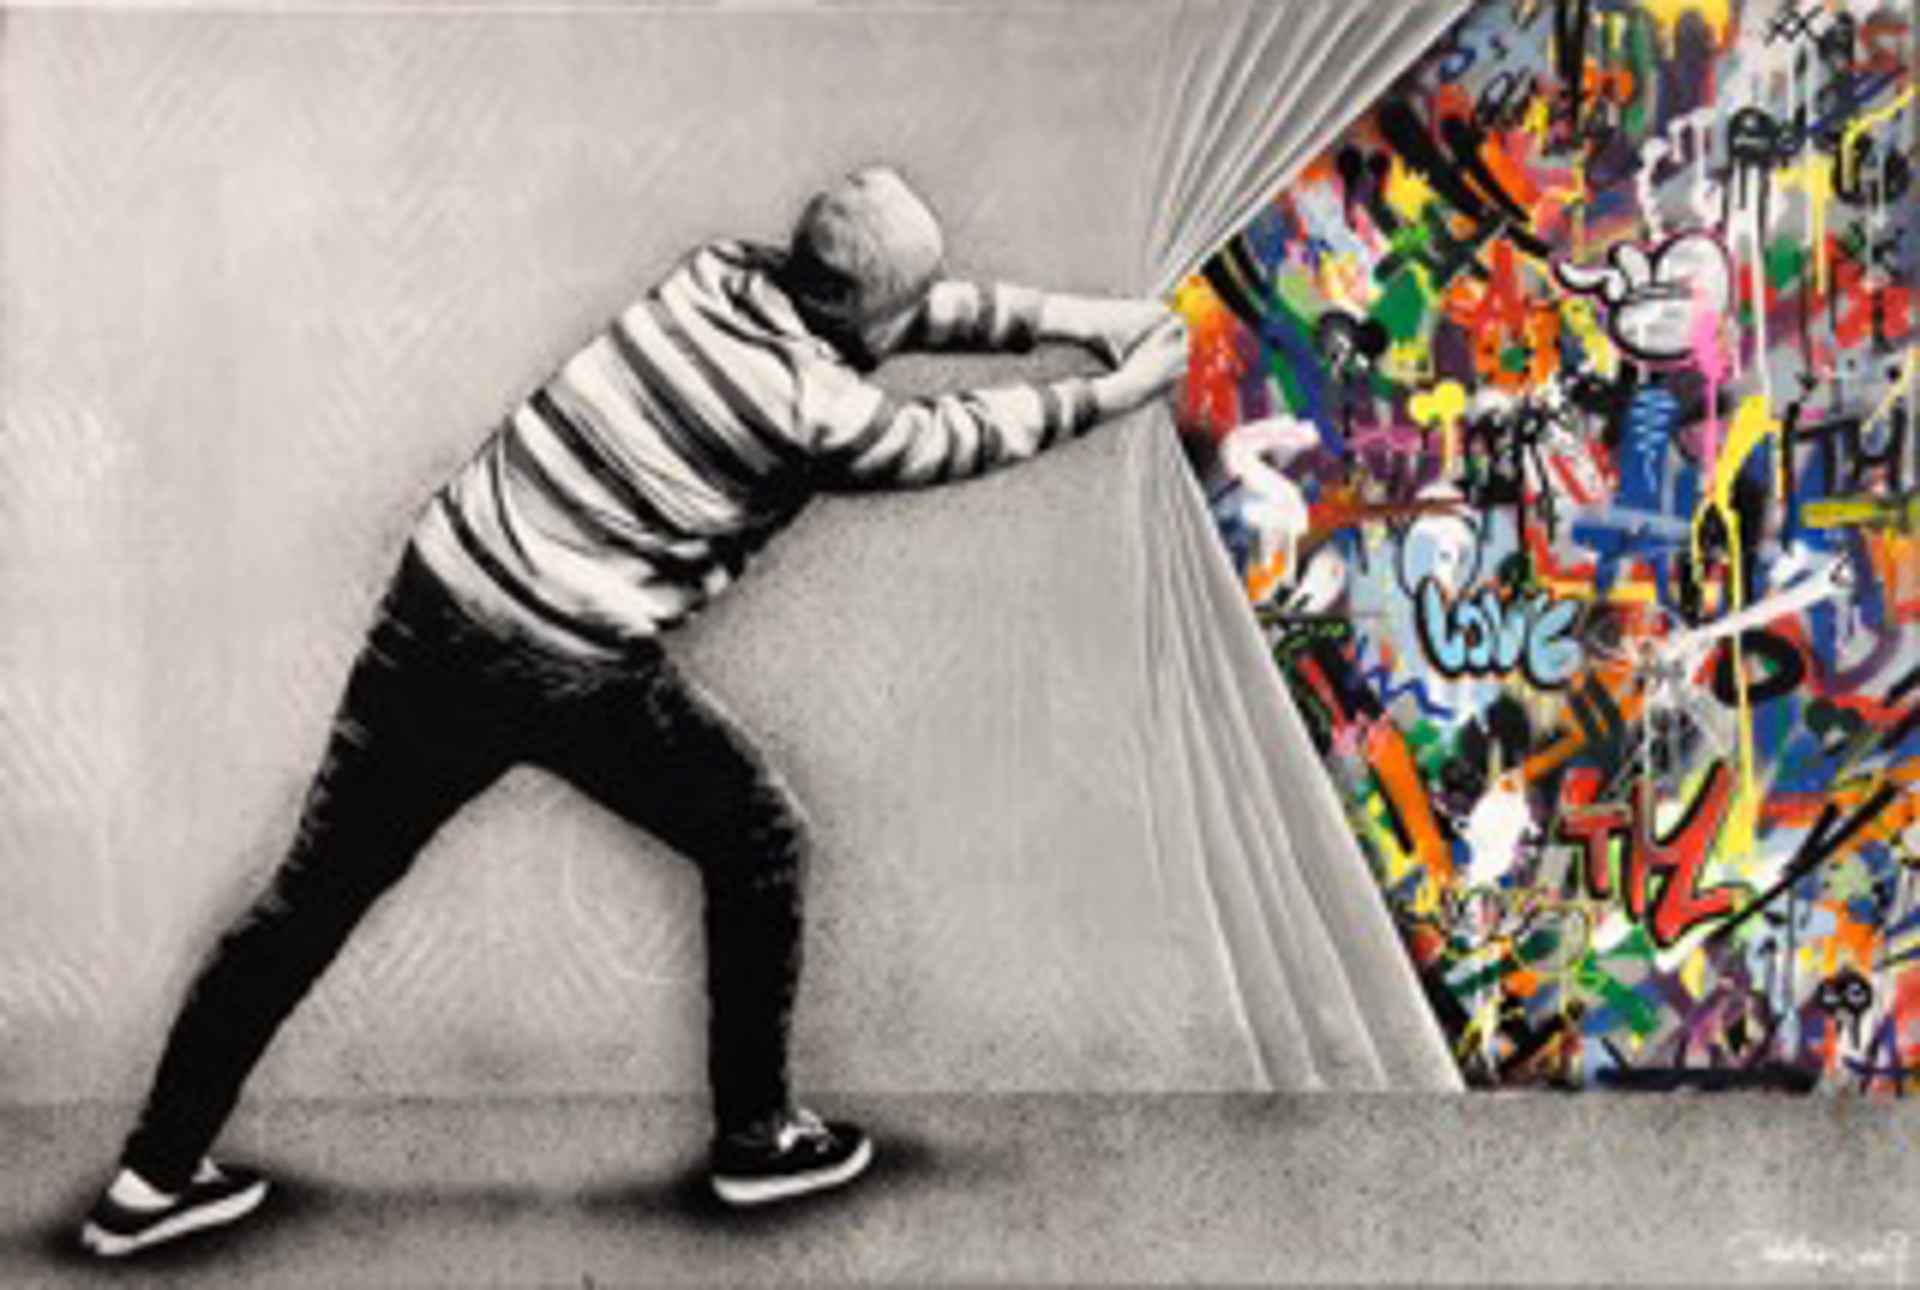 Behind The Curtain by Martin Whatson